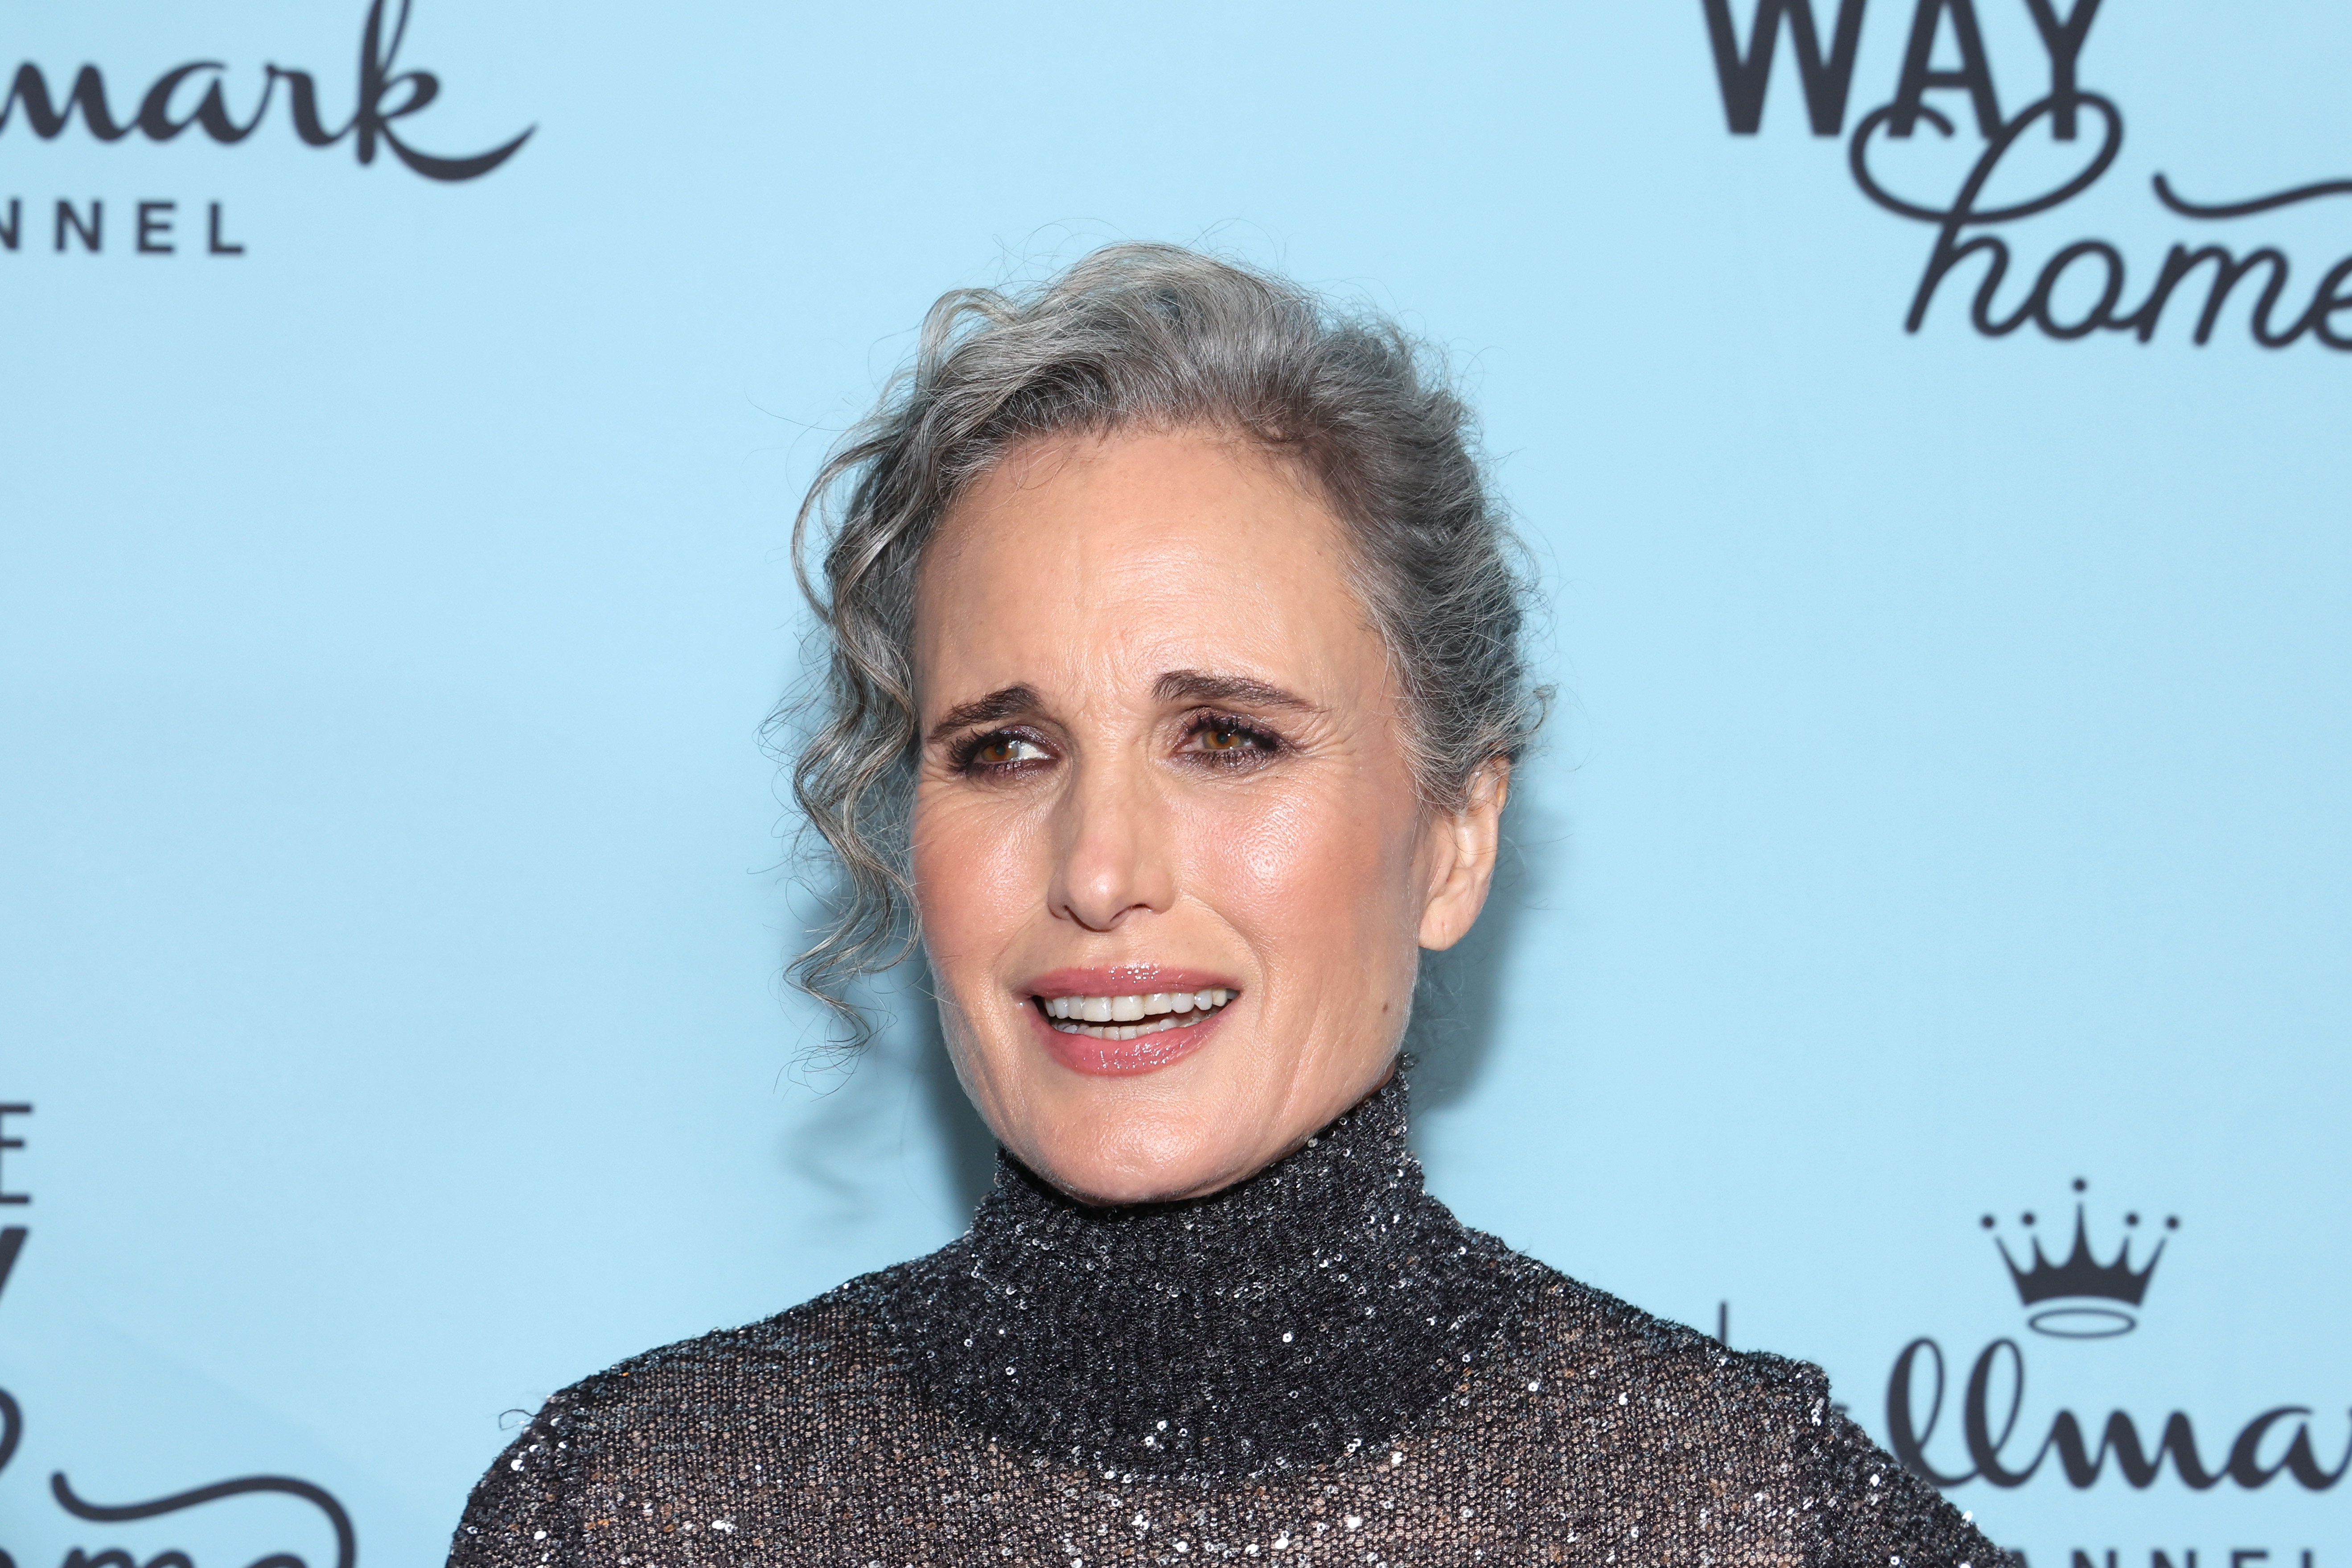 Andie MacDowell at the season 2 premiere of "The Way Home" in New York City on January 9, 2024 | Source: Getty Images